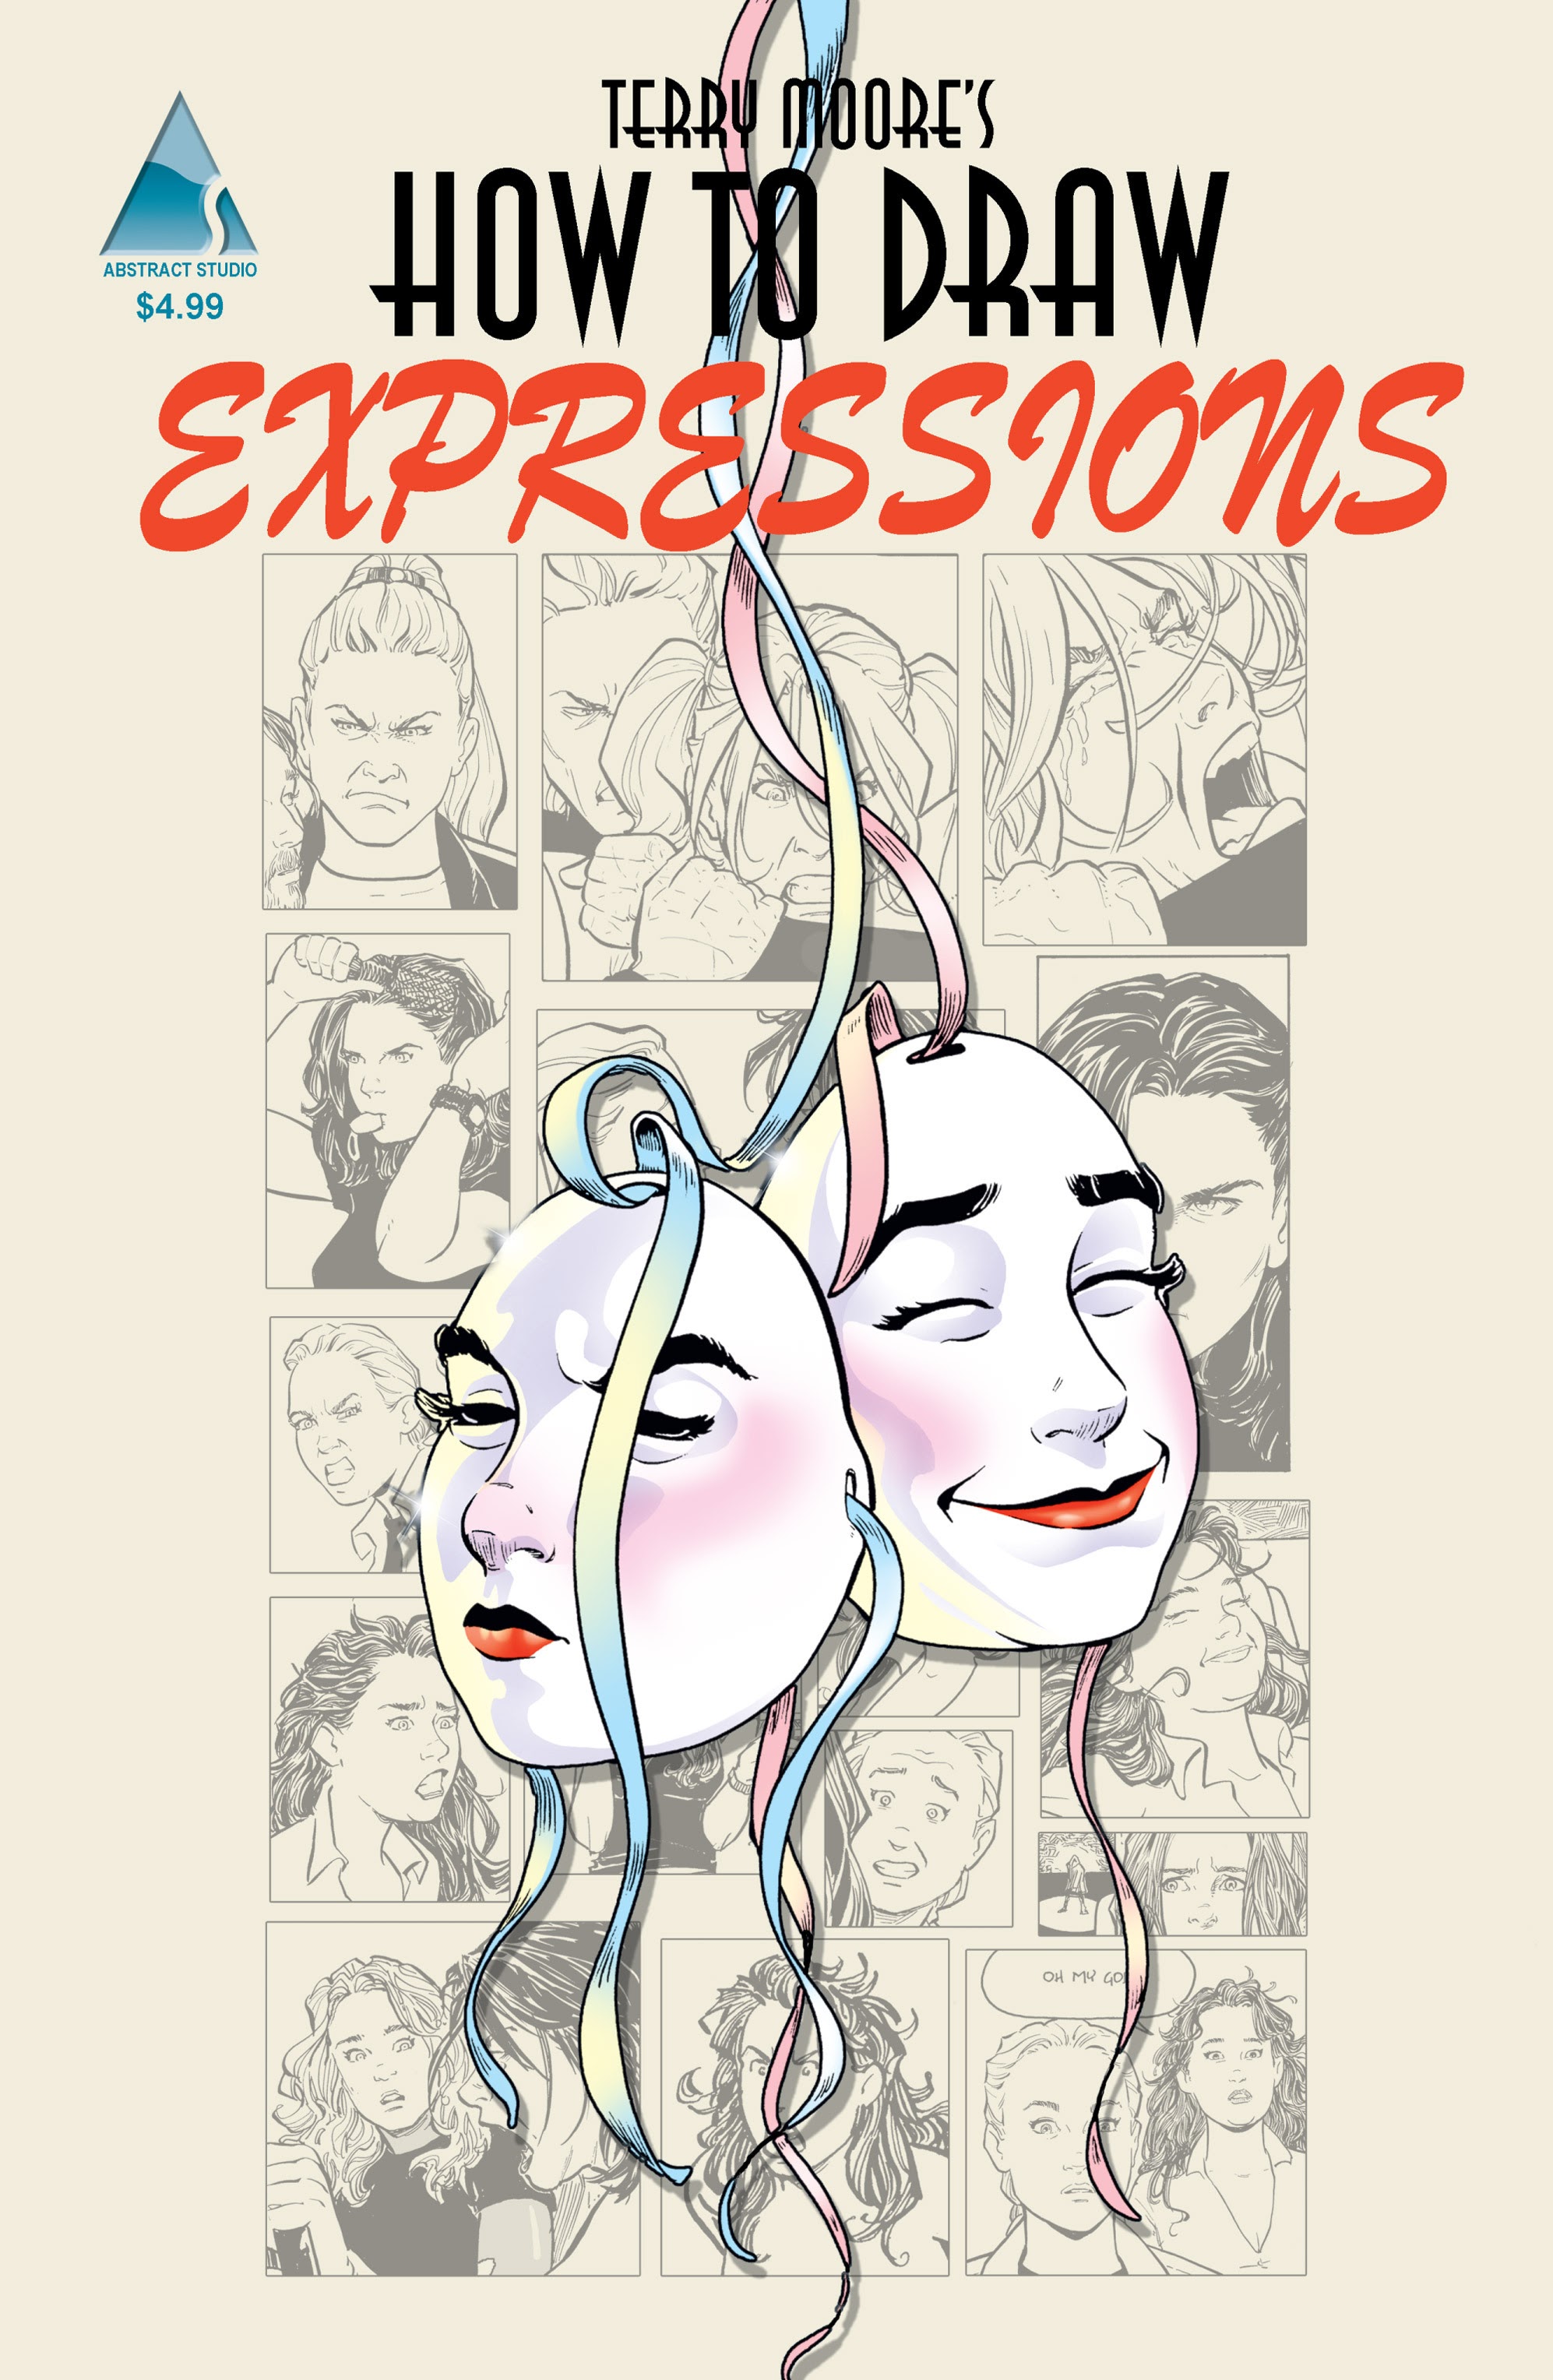 Read online Terry Moore's How to Draw... comic -  Issue # Expressions - 1